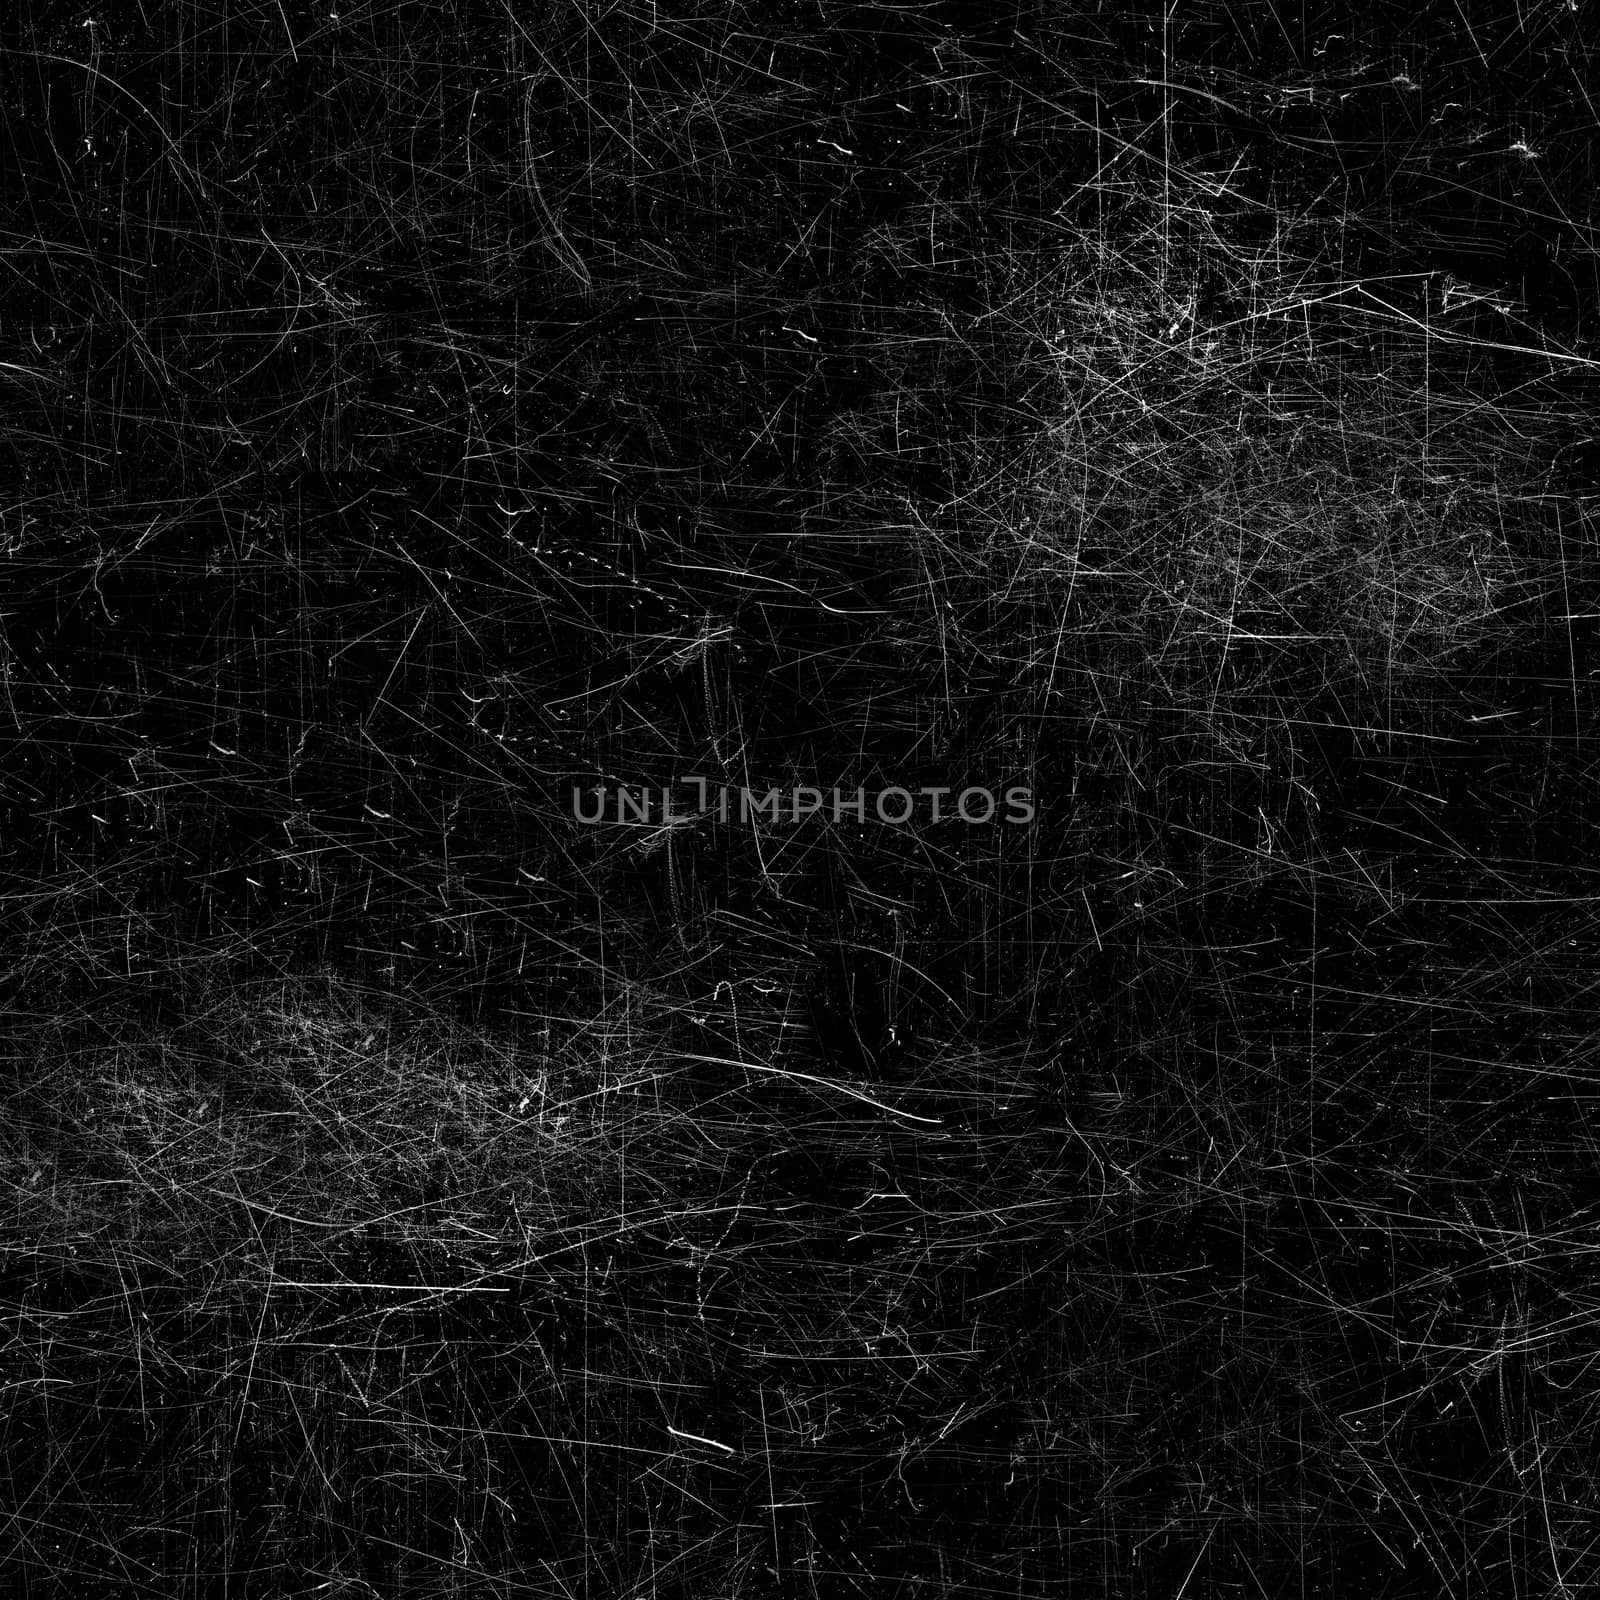 On a black background a large number of white scratches .Texture or background like a needle